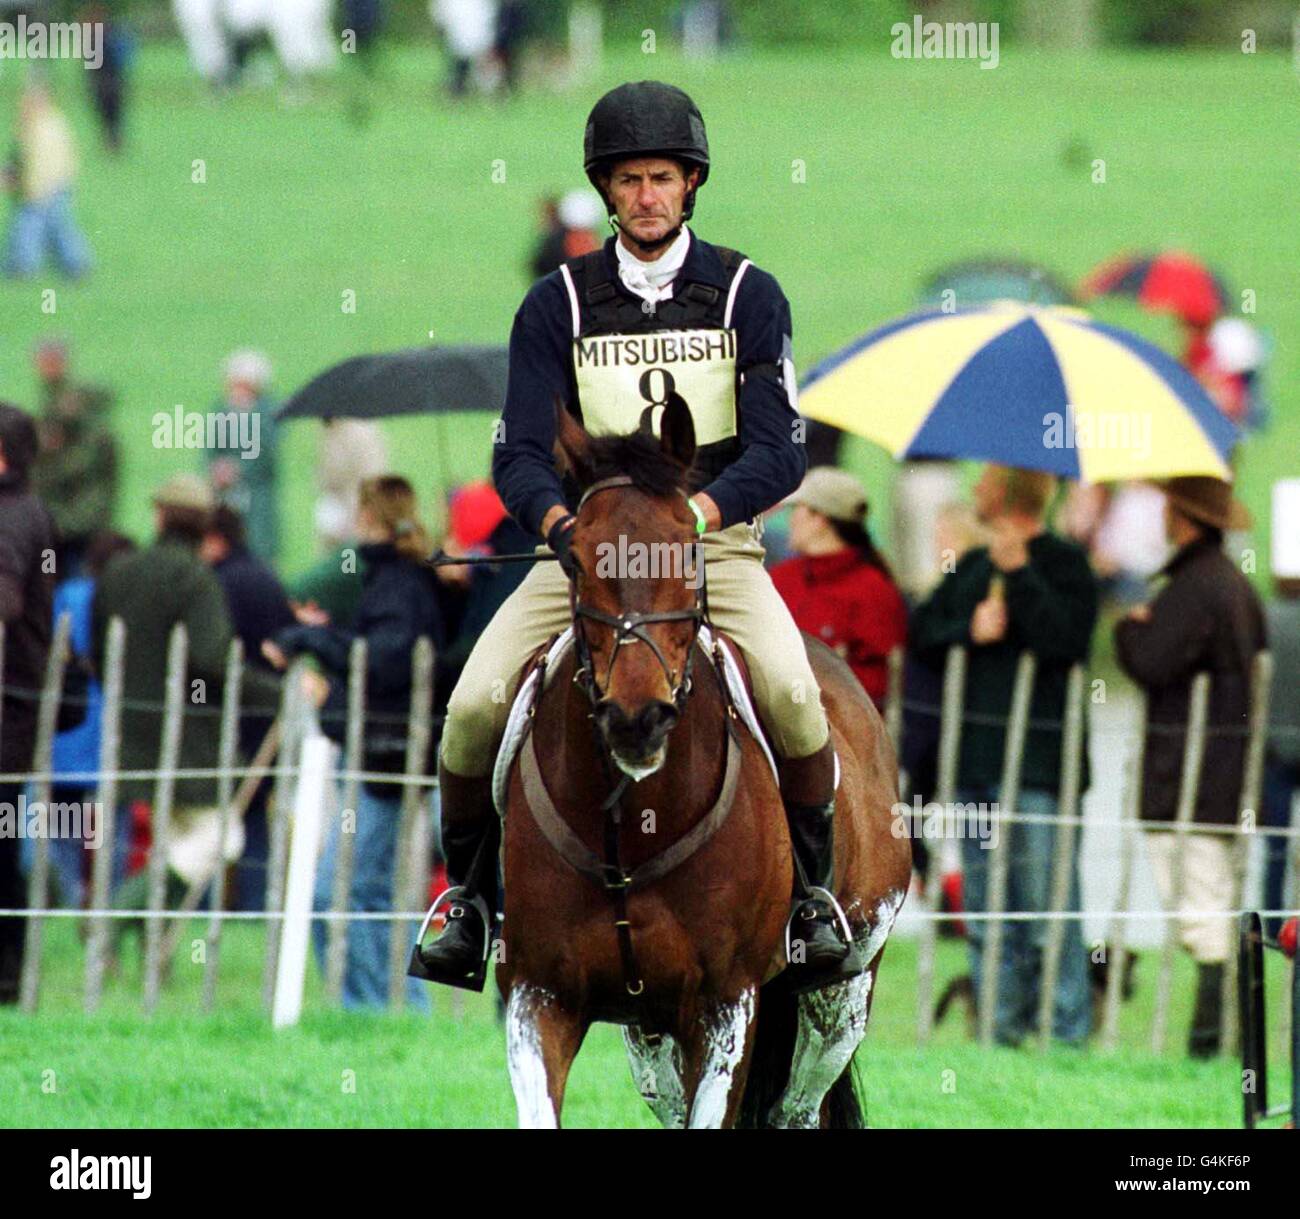 Mark Todd on 'Word for Word' prepares for the Cross Country phase of the Mitsubishi Motors Badminton Horse Trials, Gloustershire. Stock Photo